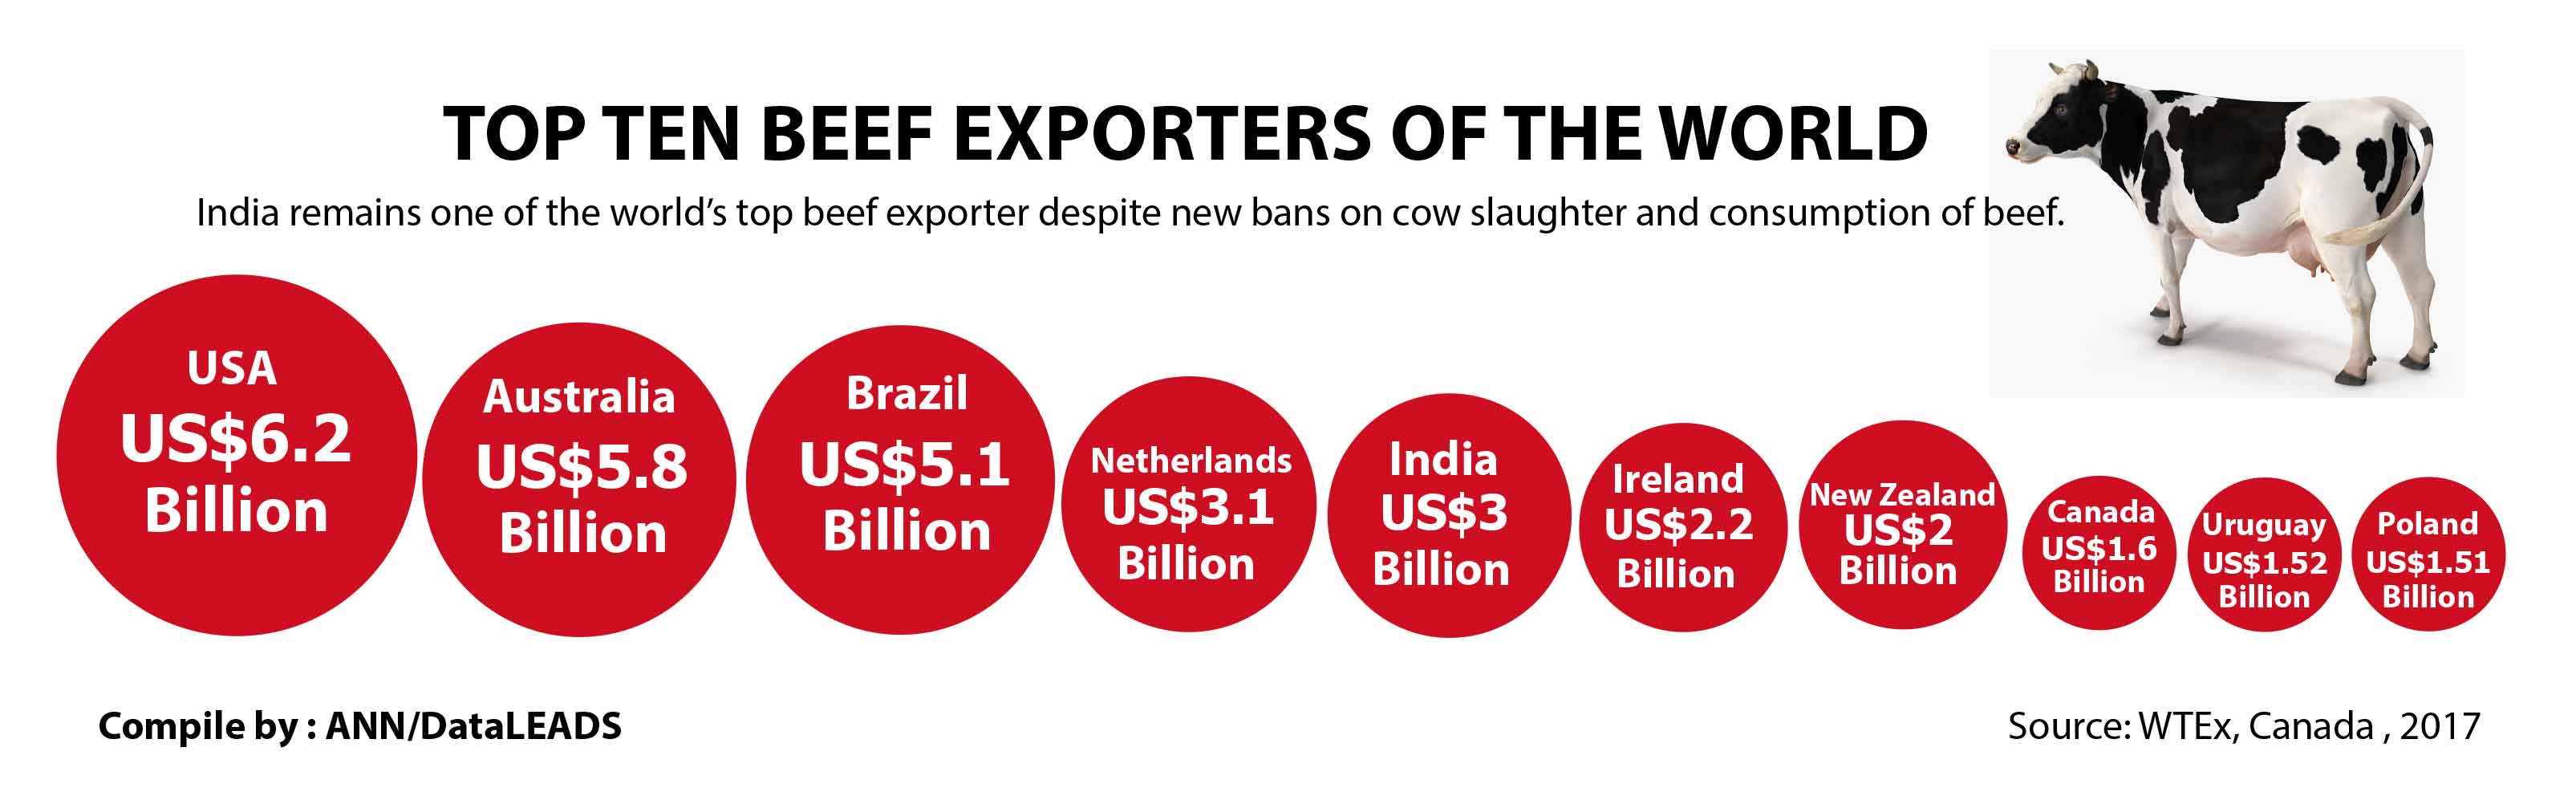 Top beef exporters of the world Inquirer Business